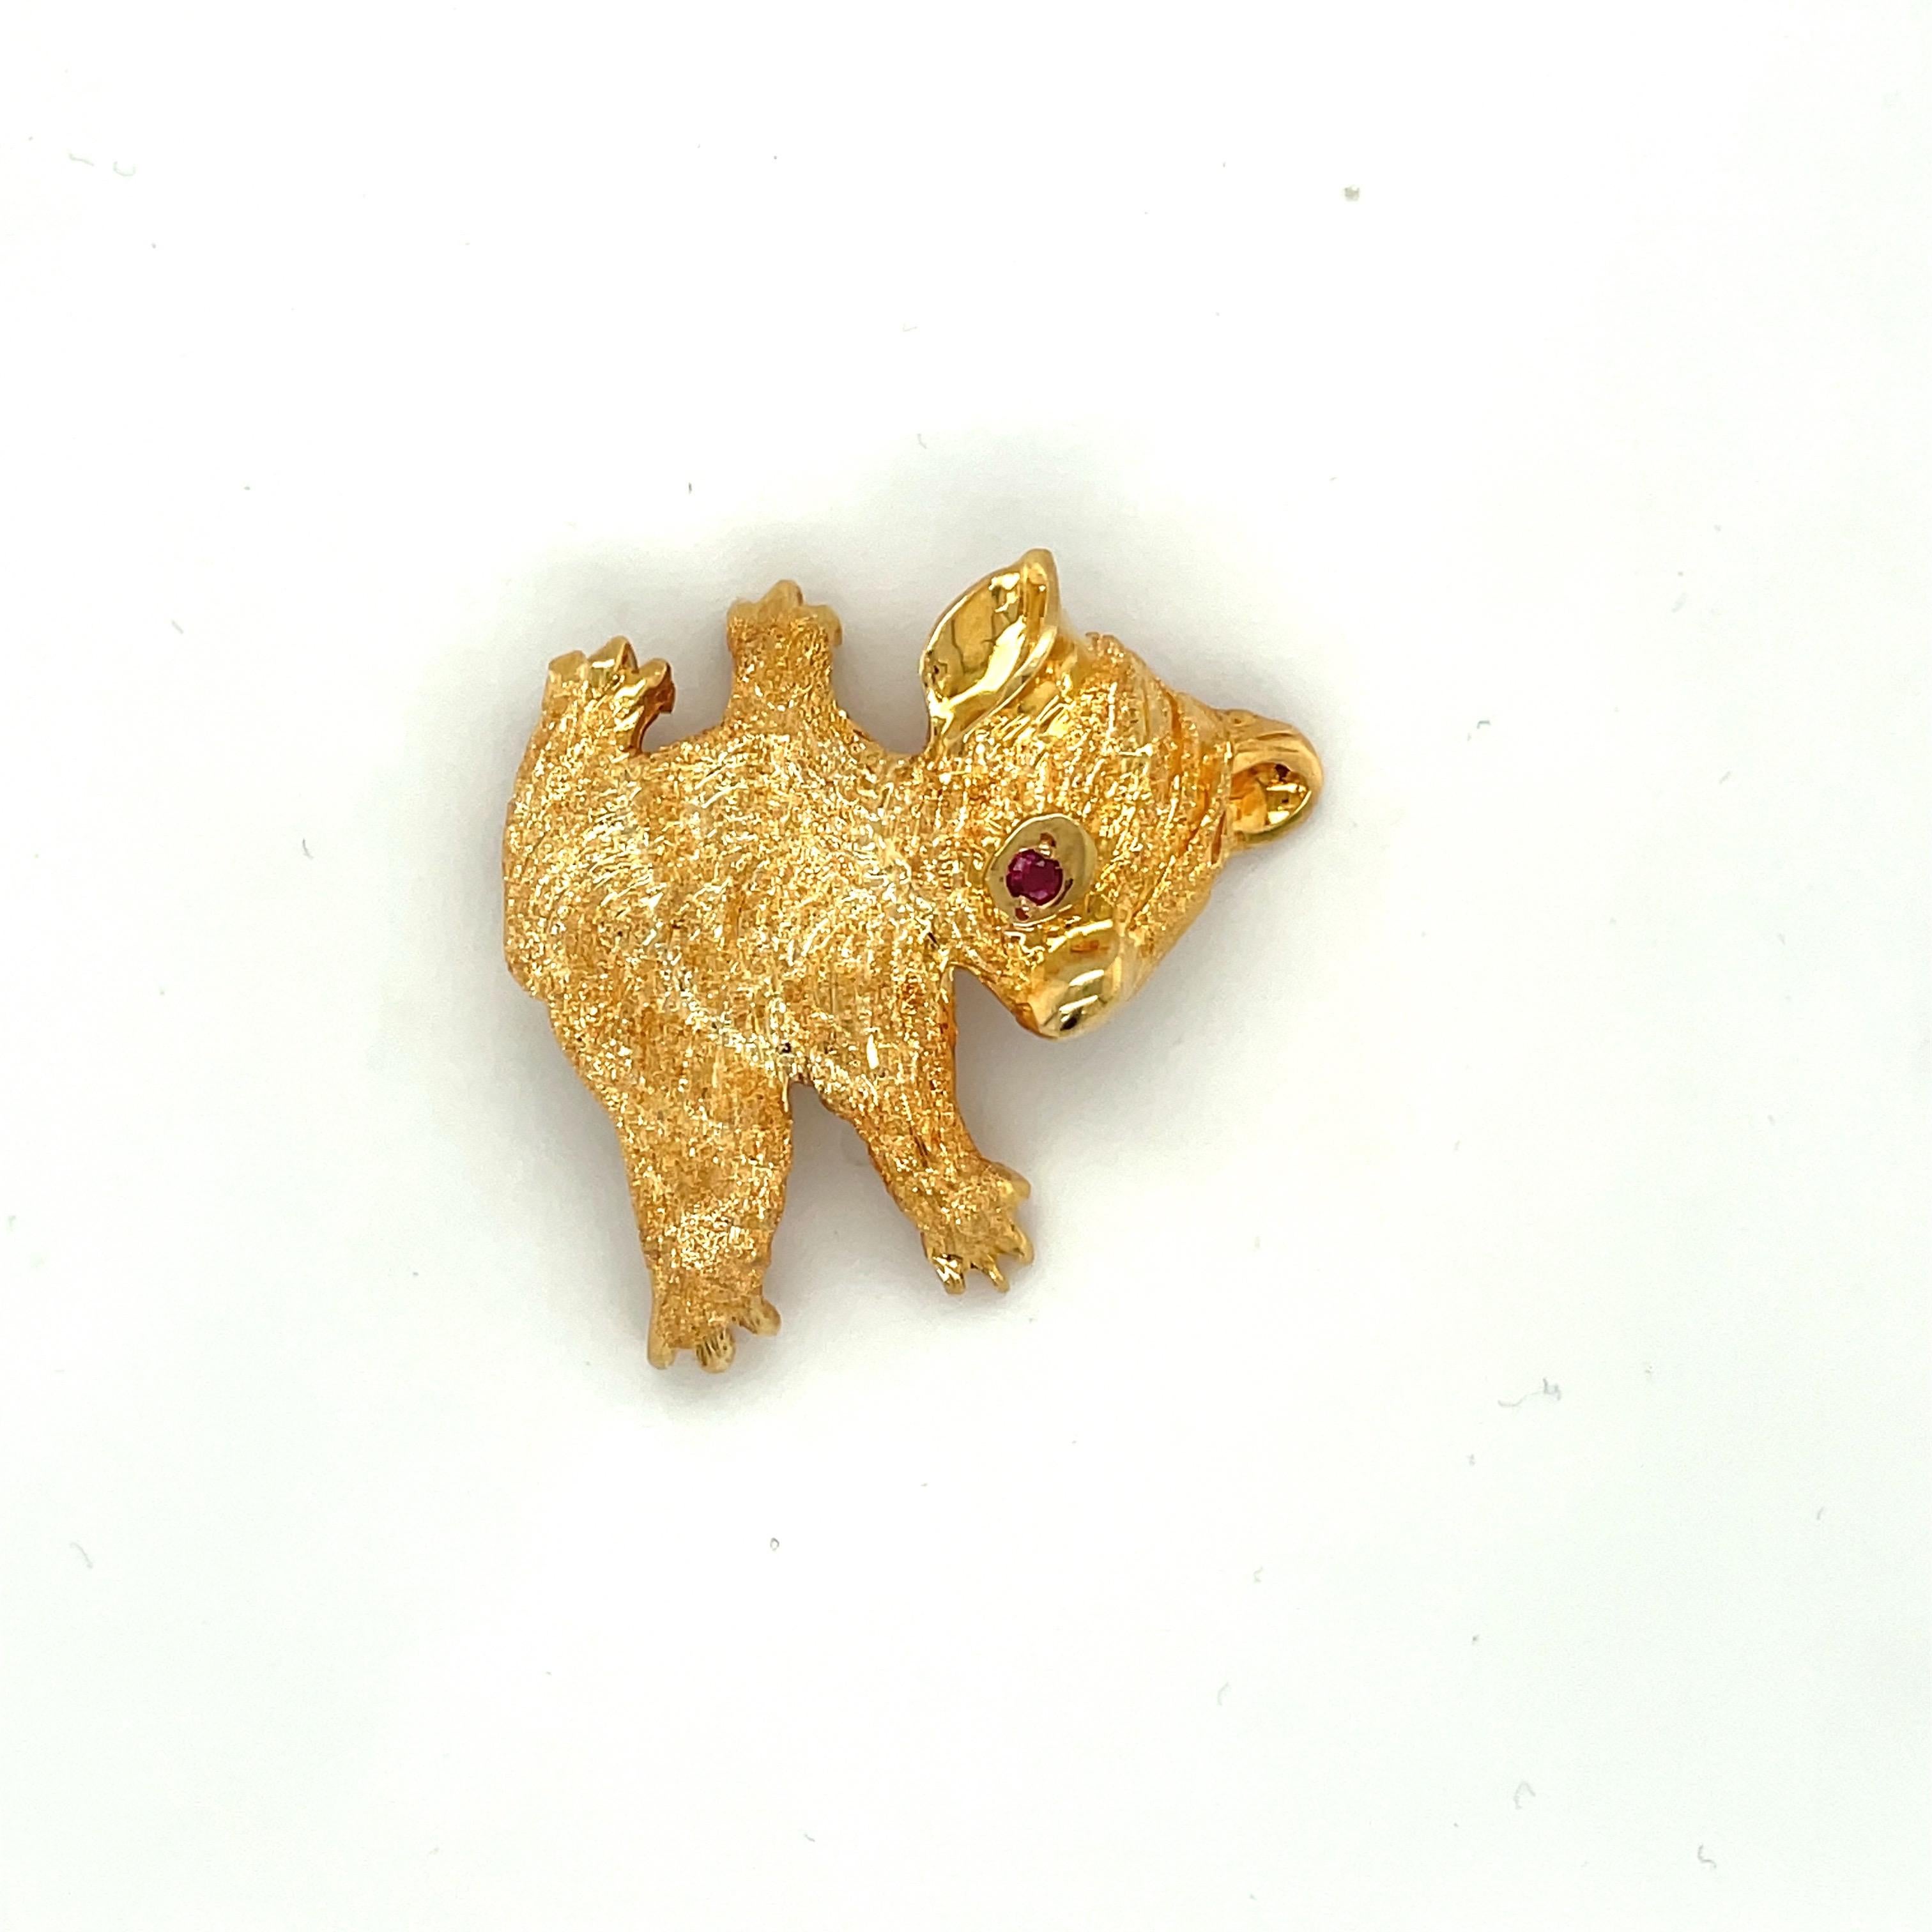 18KT Yellow Gold Panda Brooch with Ruby Eye For Sale 1